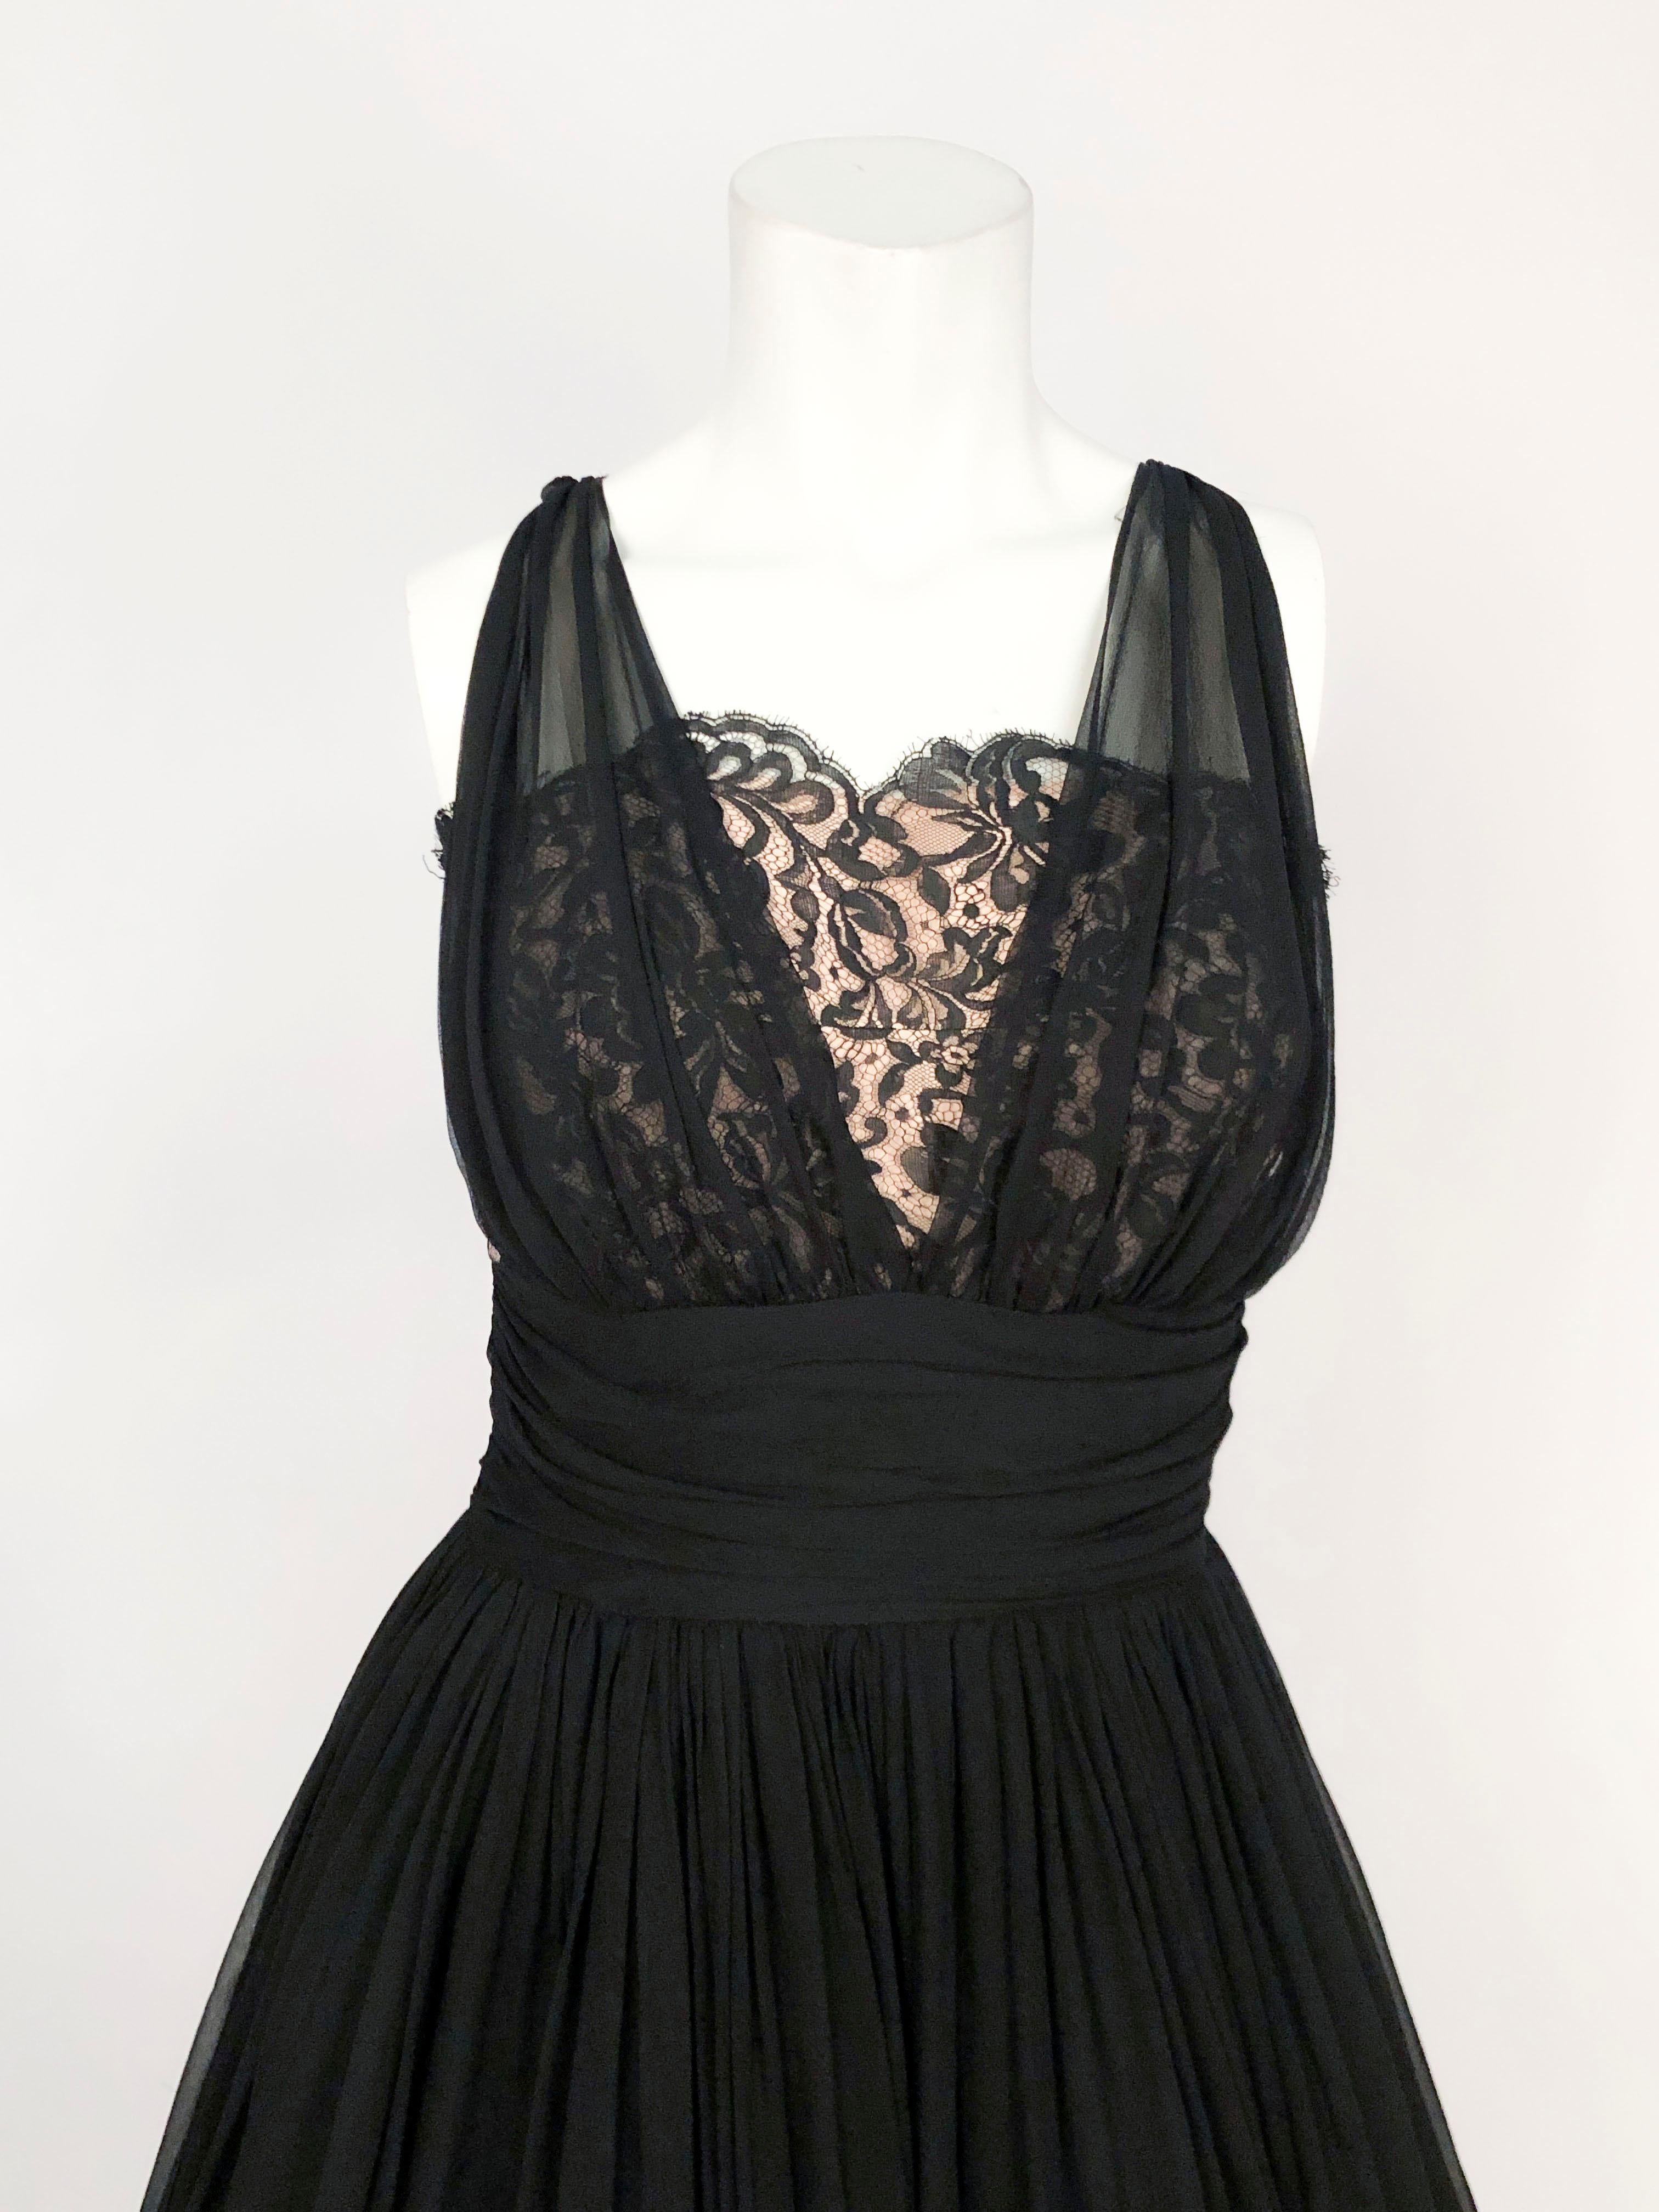 1950s Black Silk Chiffon Cocktail Dress with full skirt, draped and gathered bodice that is laid over a black lace on a blush colored silk. This piece is photographed and styled with an era appropriate petticoat that is not included with the dress.